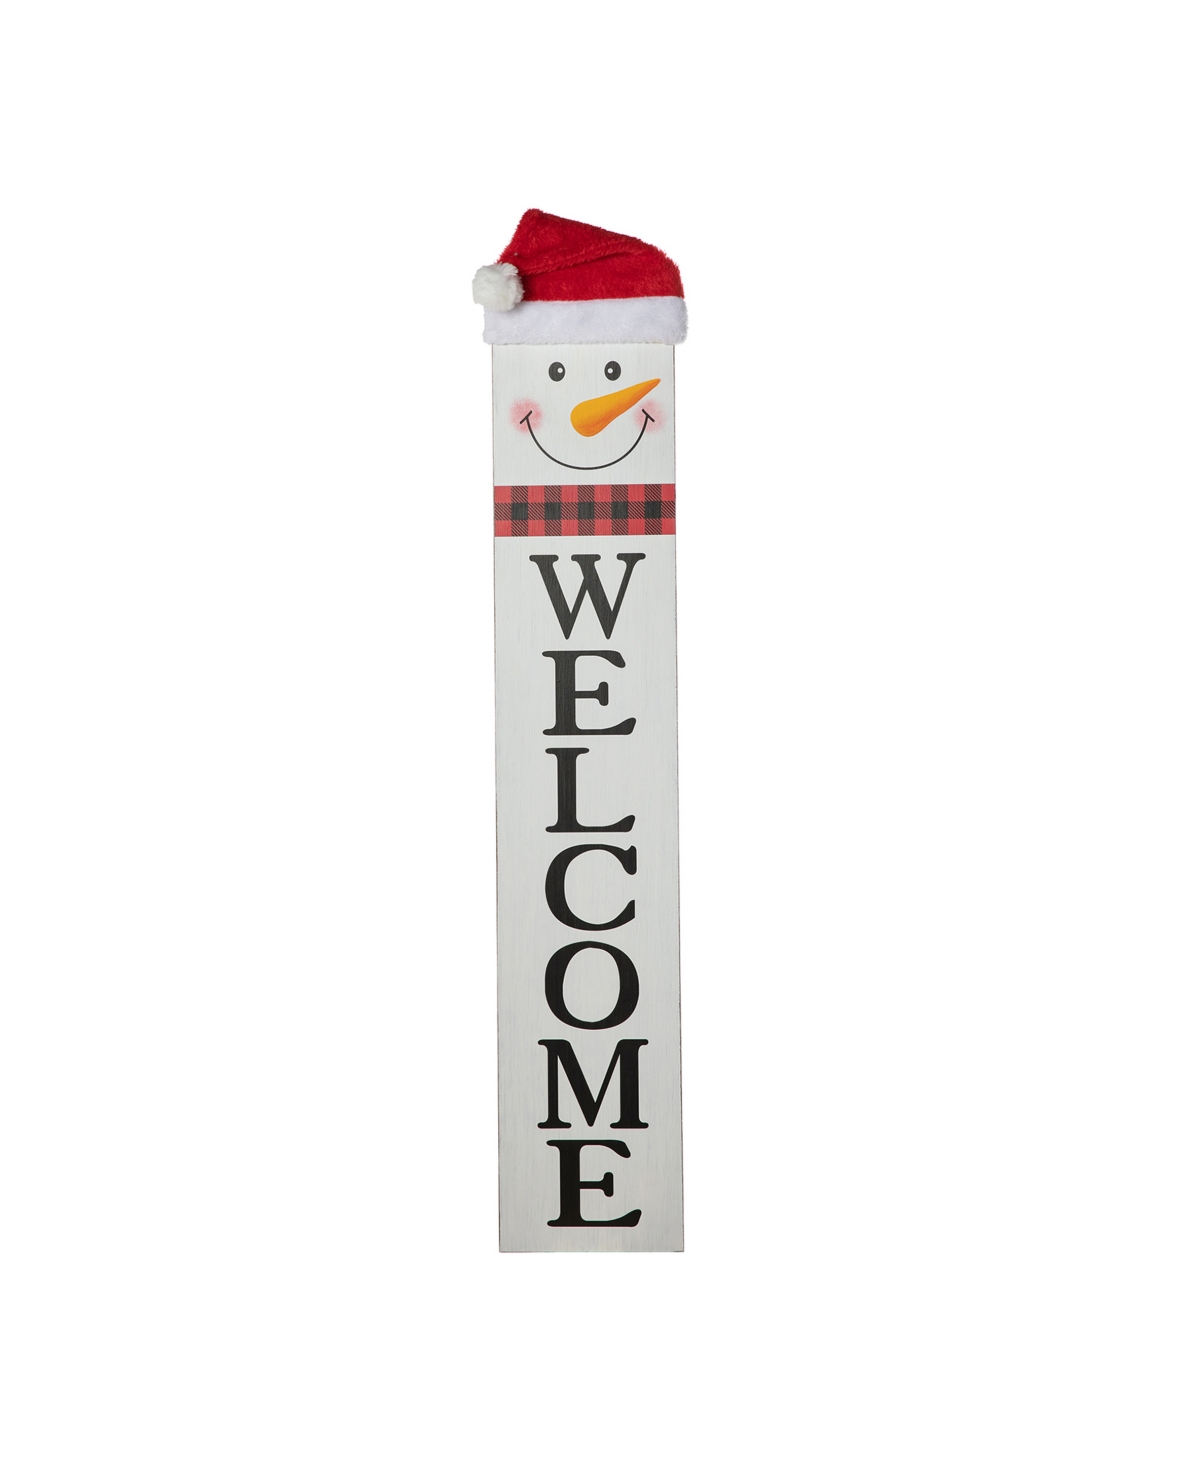 42.5" Reversible Wooden Hohoho and Snowman Porch Sign - Multi